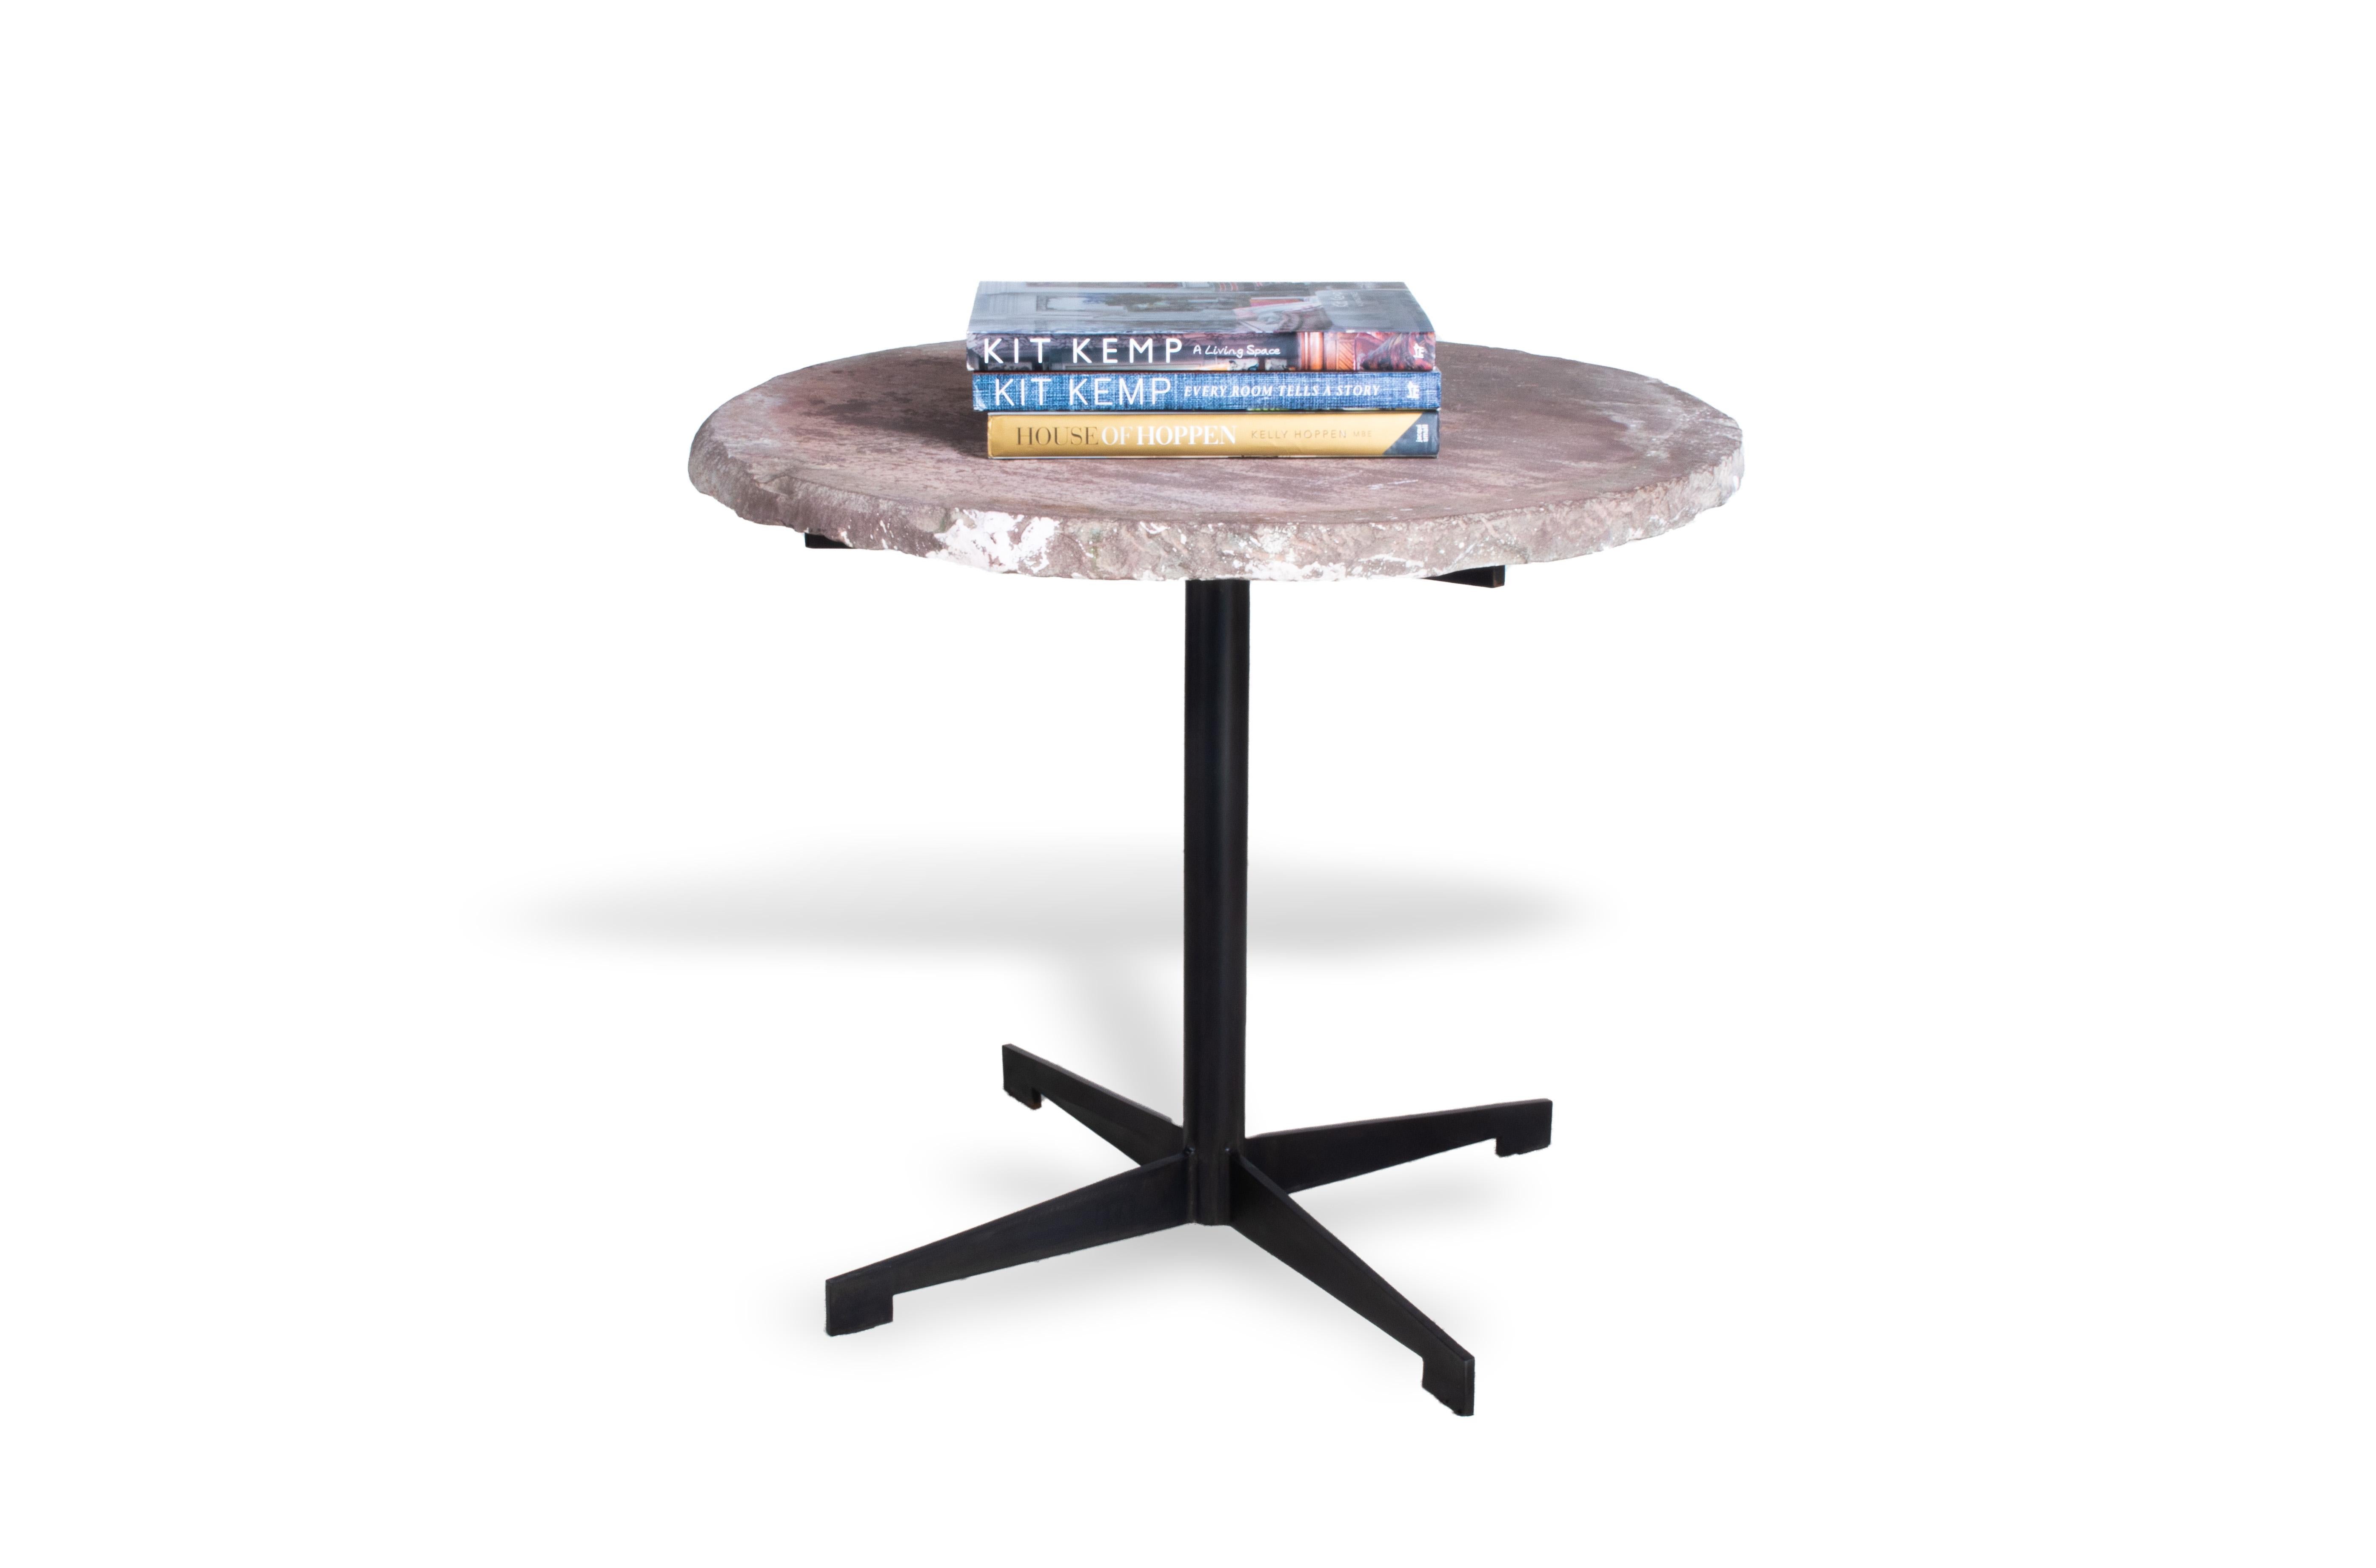 A stunning, modern and creative piece of furniture, this circular tabletop is crafted from chalkstone, a natural material with unique and organic detailing. Set atop an ebonized steel base, this table is perfect for your home. For a chic coffee